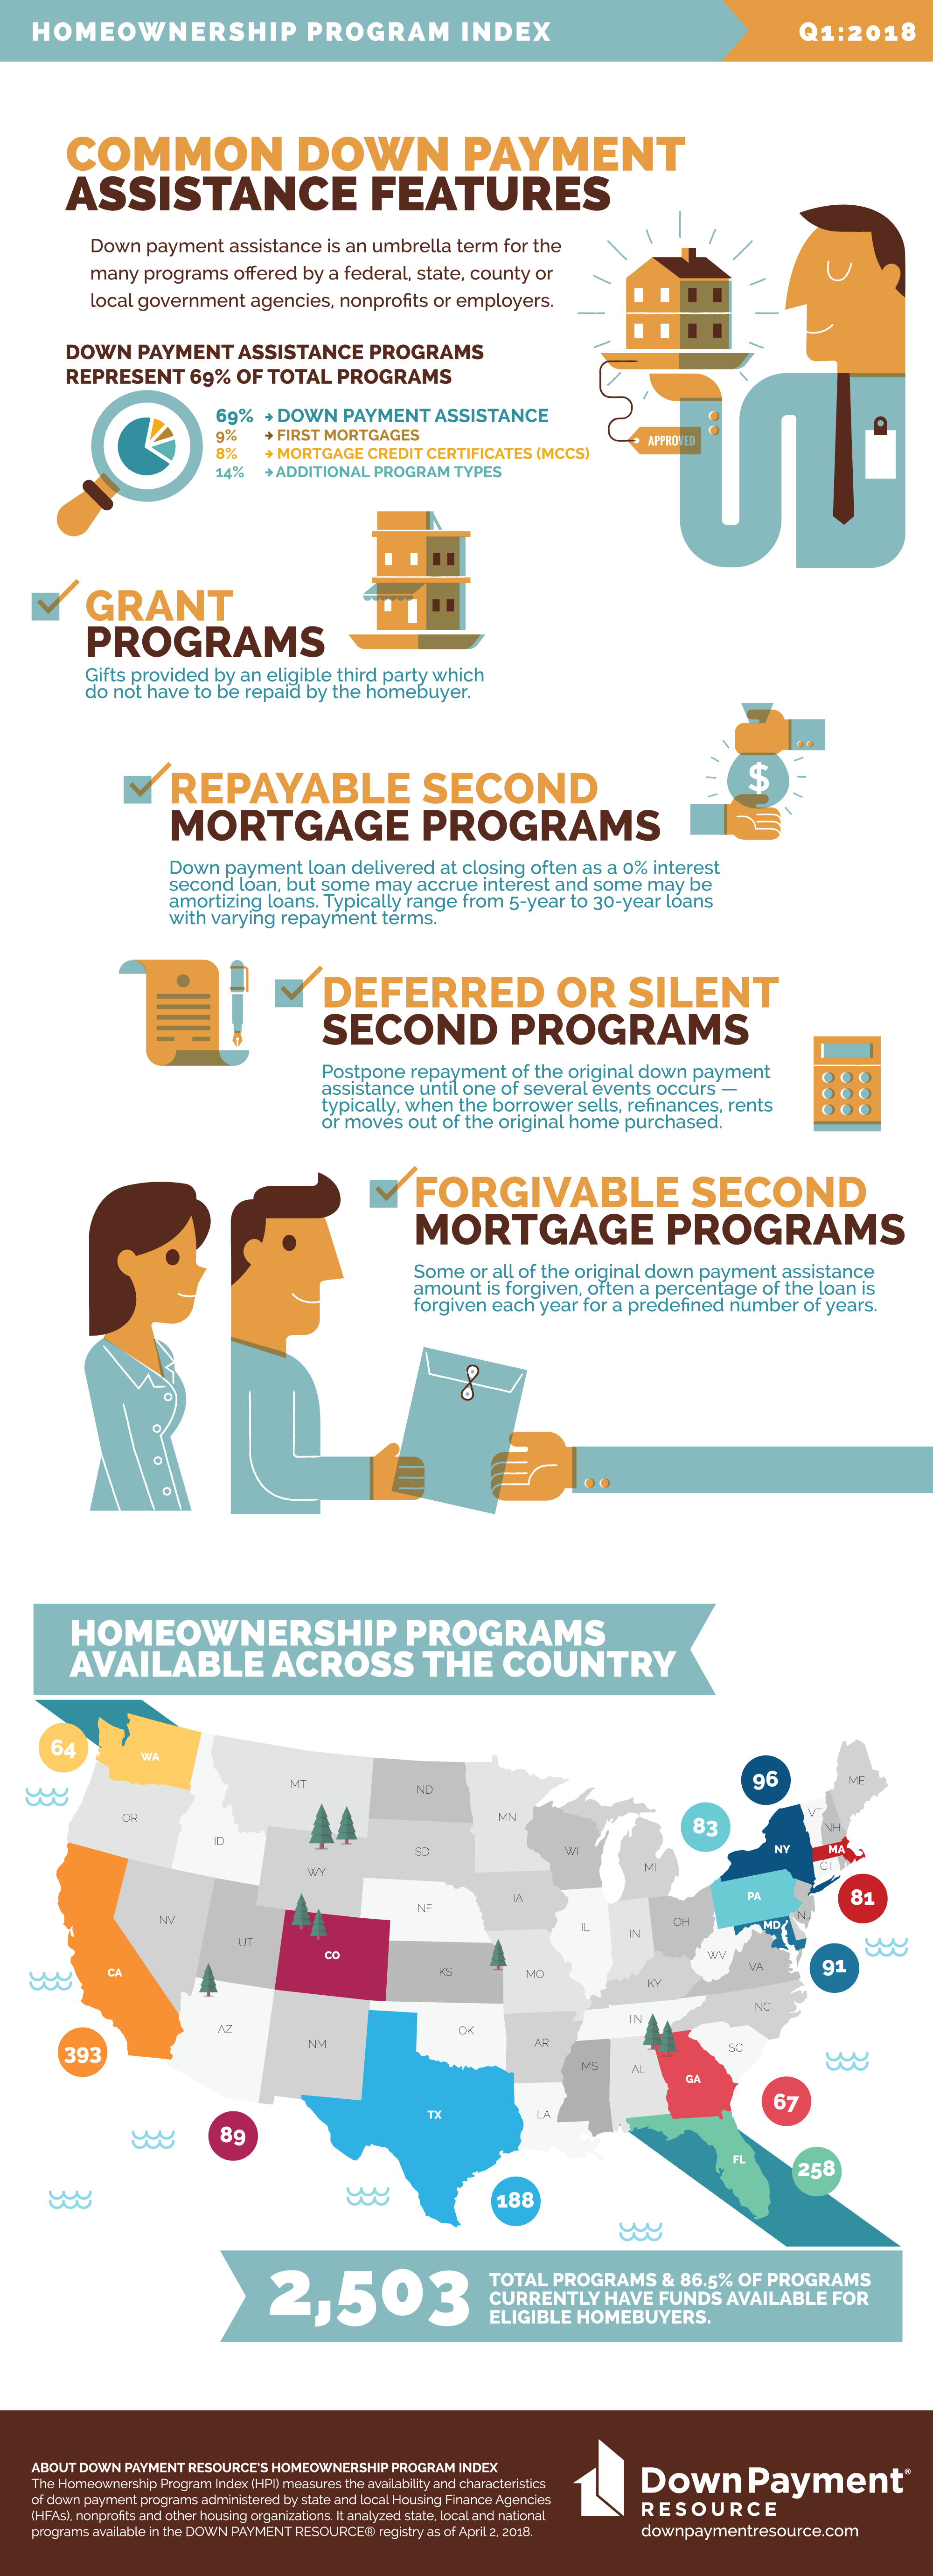 HELP Down Payment Assistance Grant - California Mortgage Broker